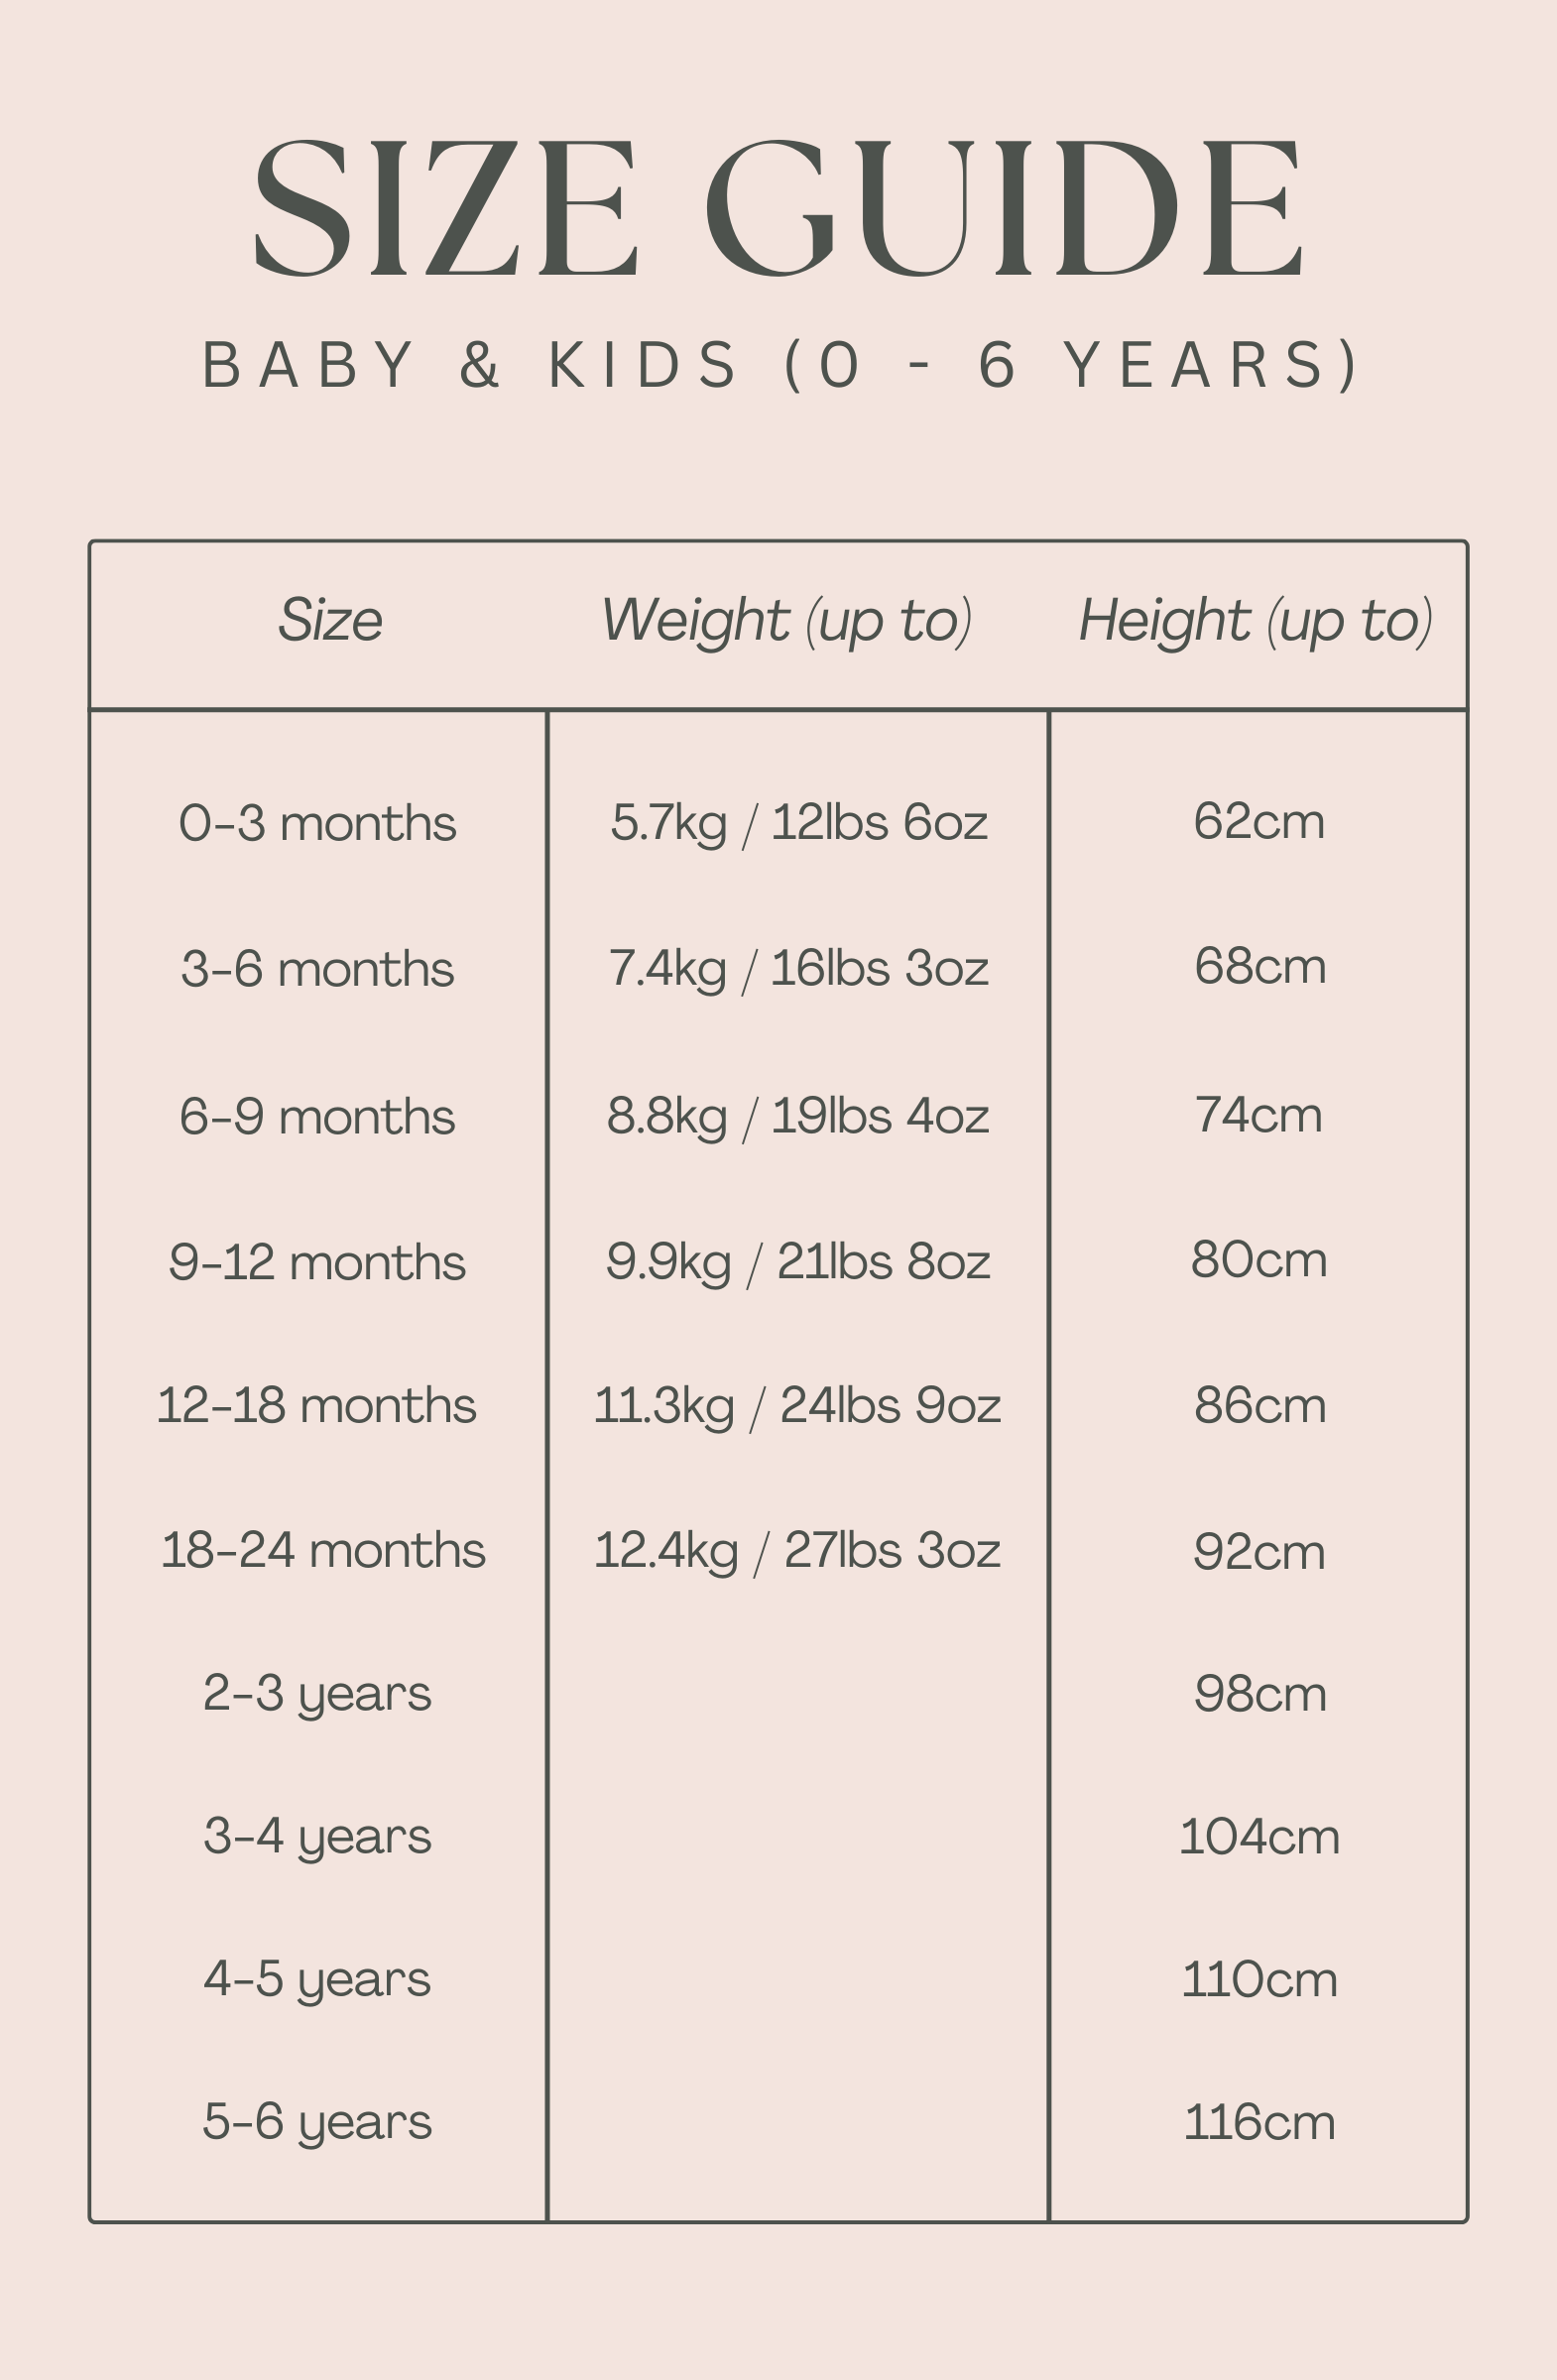 Aneby size guide 0 to 6 years